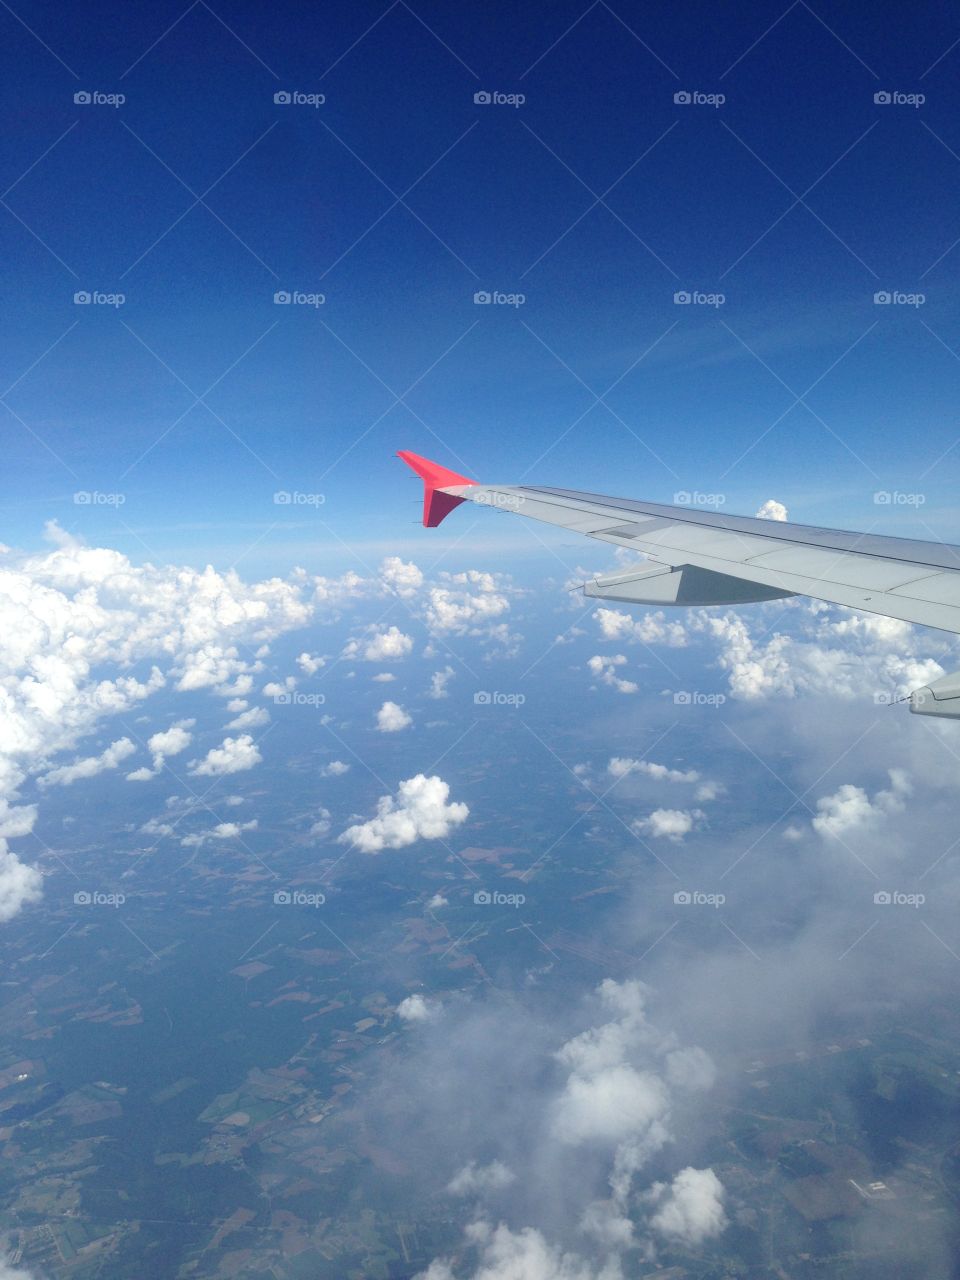 Beautiful view of the flight from the plane